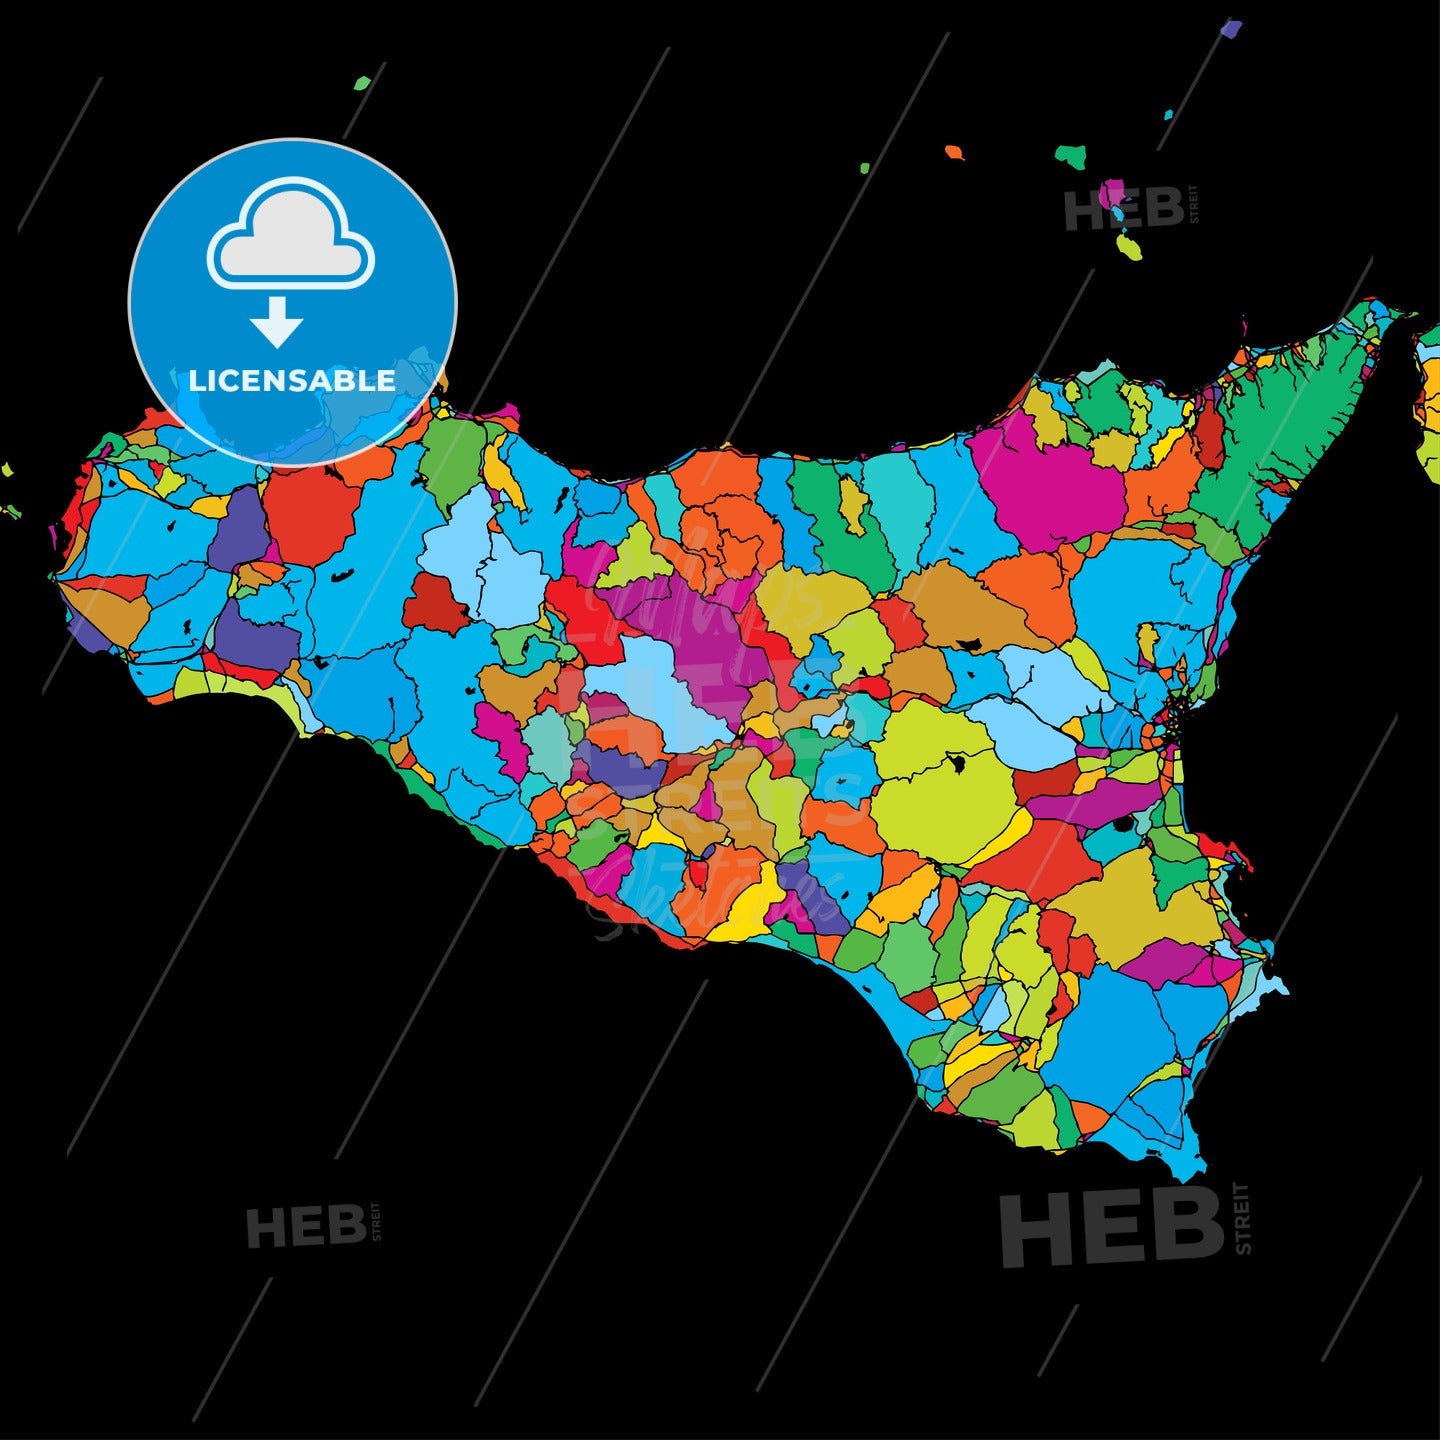 Sicily Island, Italy, Colorful Vector Map on Black